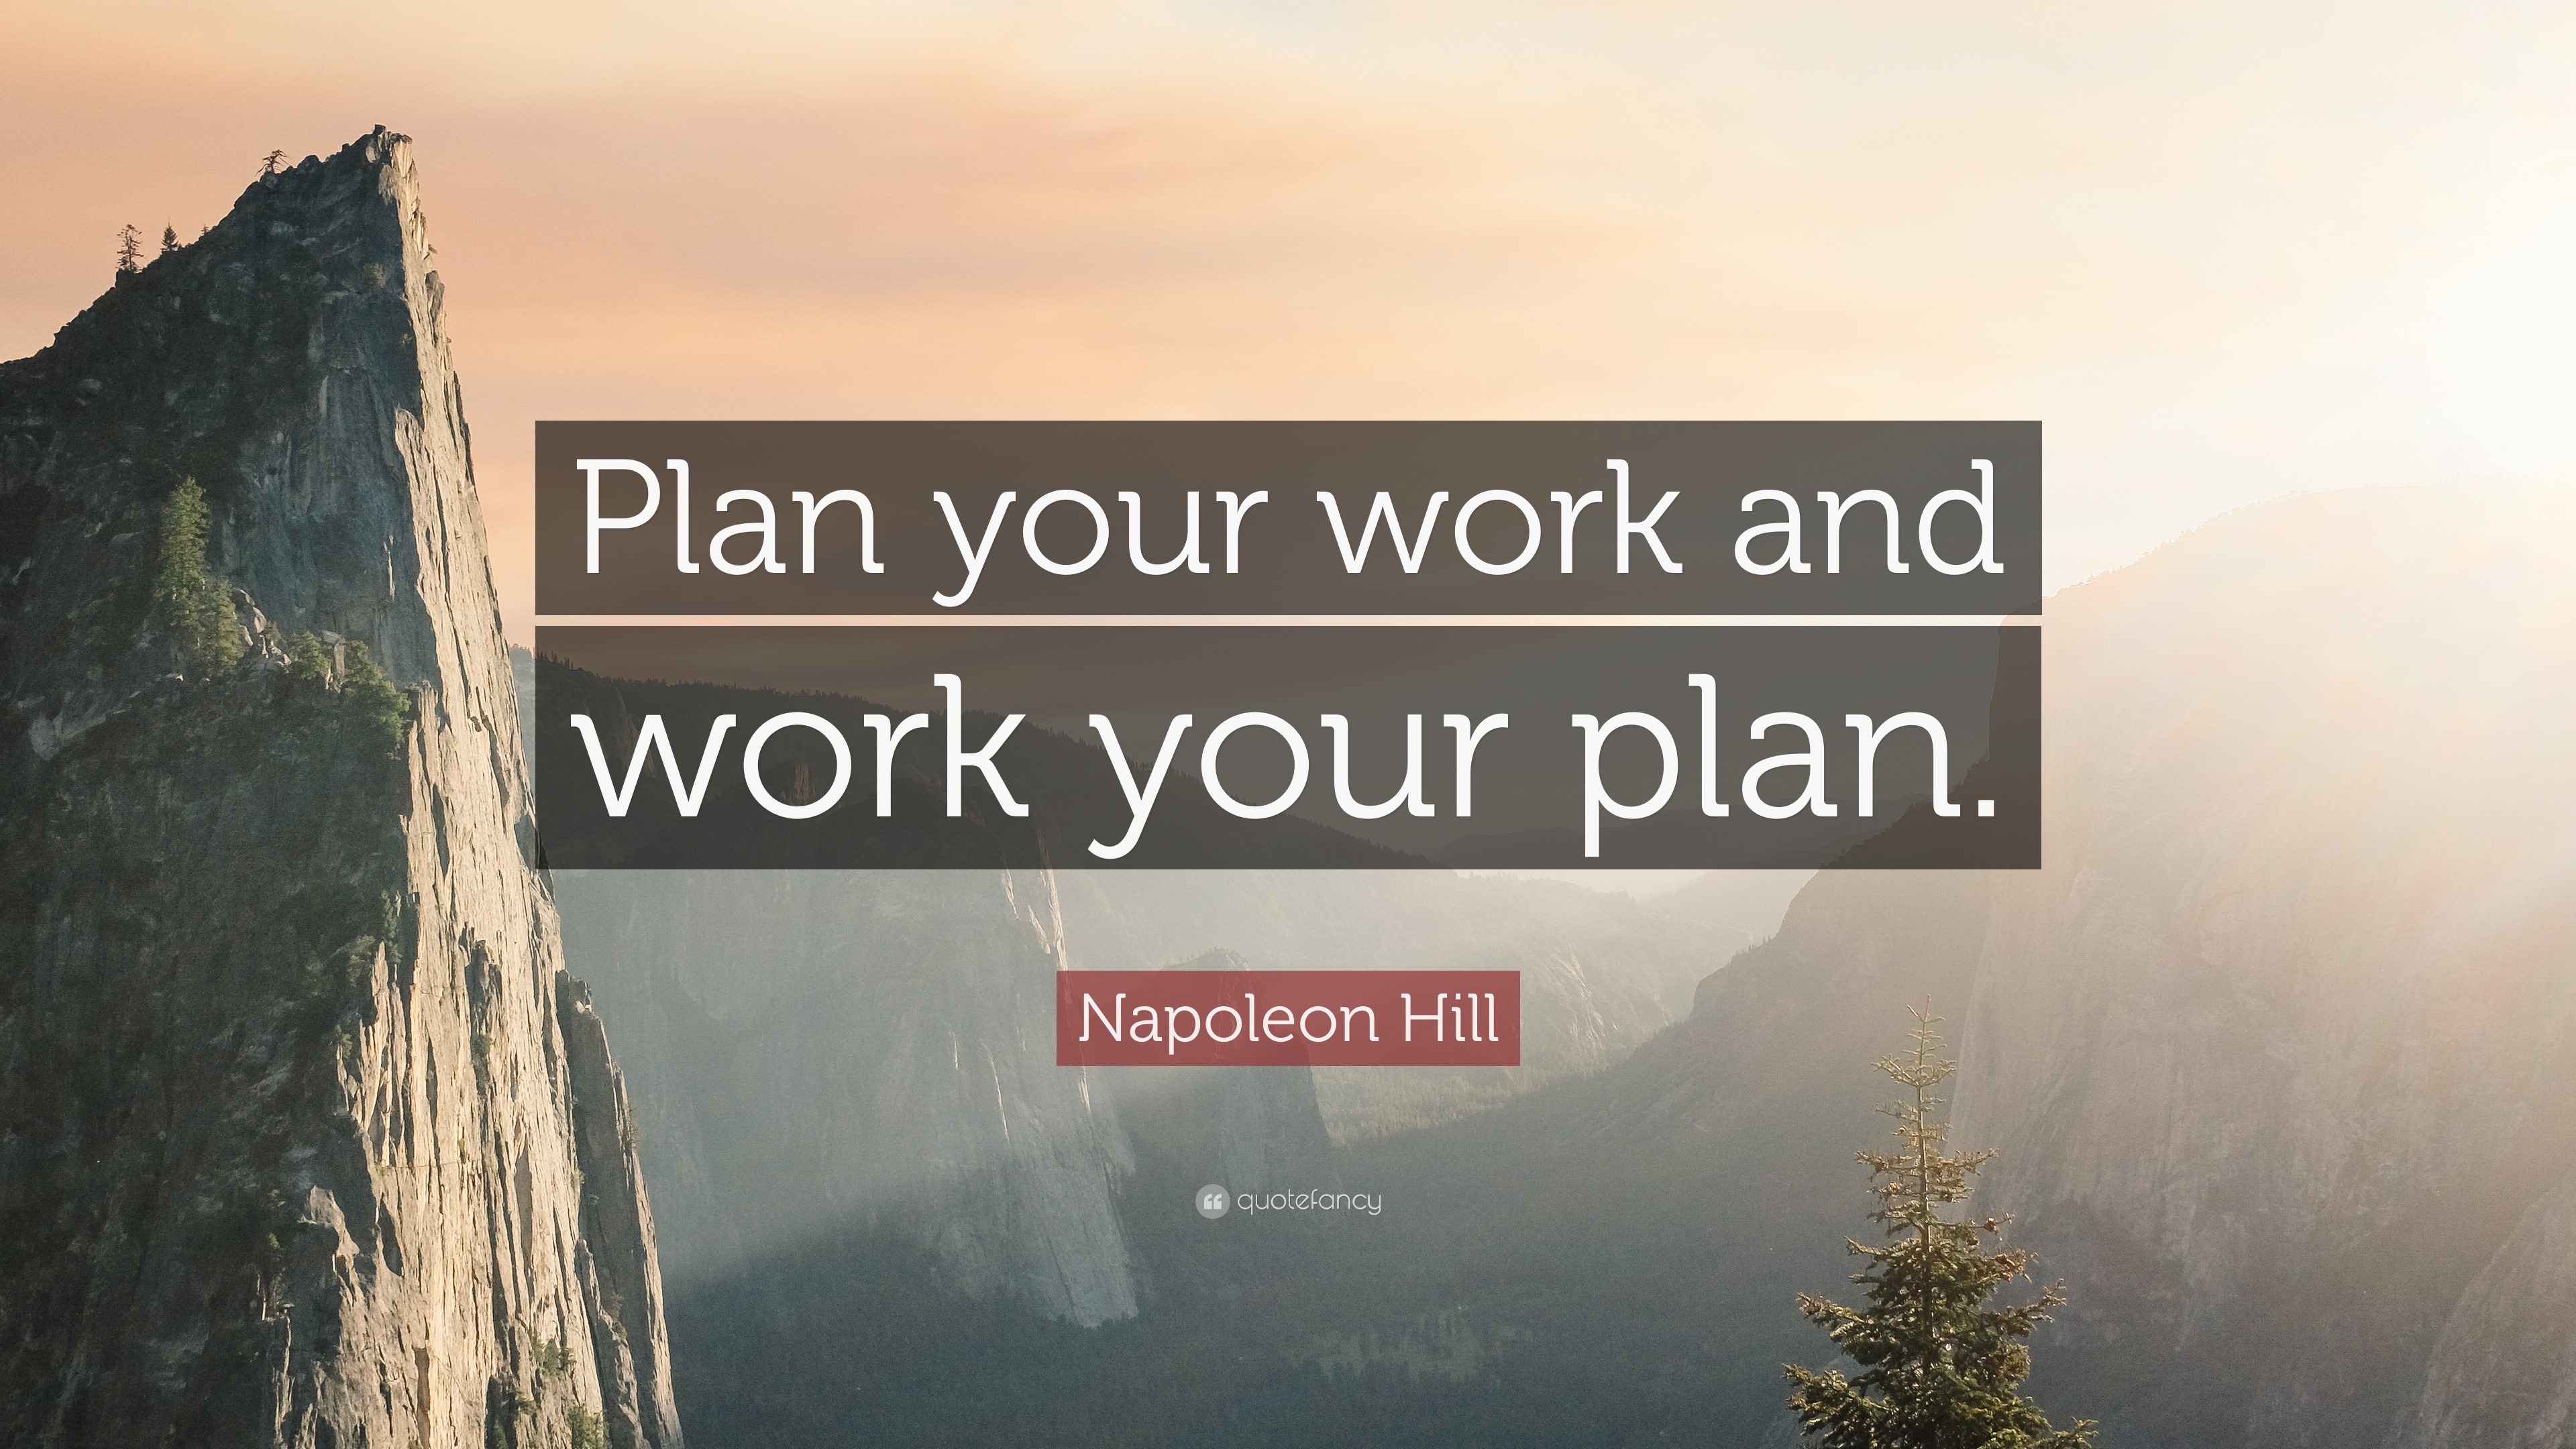 Napoleon Hill Quote: “Plan your work and work your plan.”